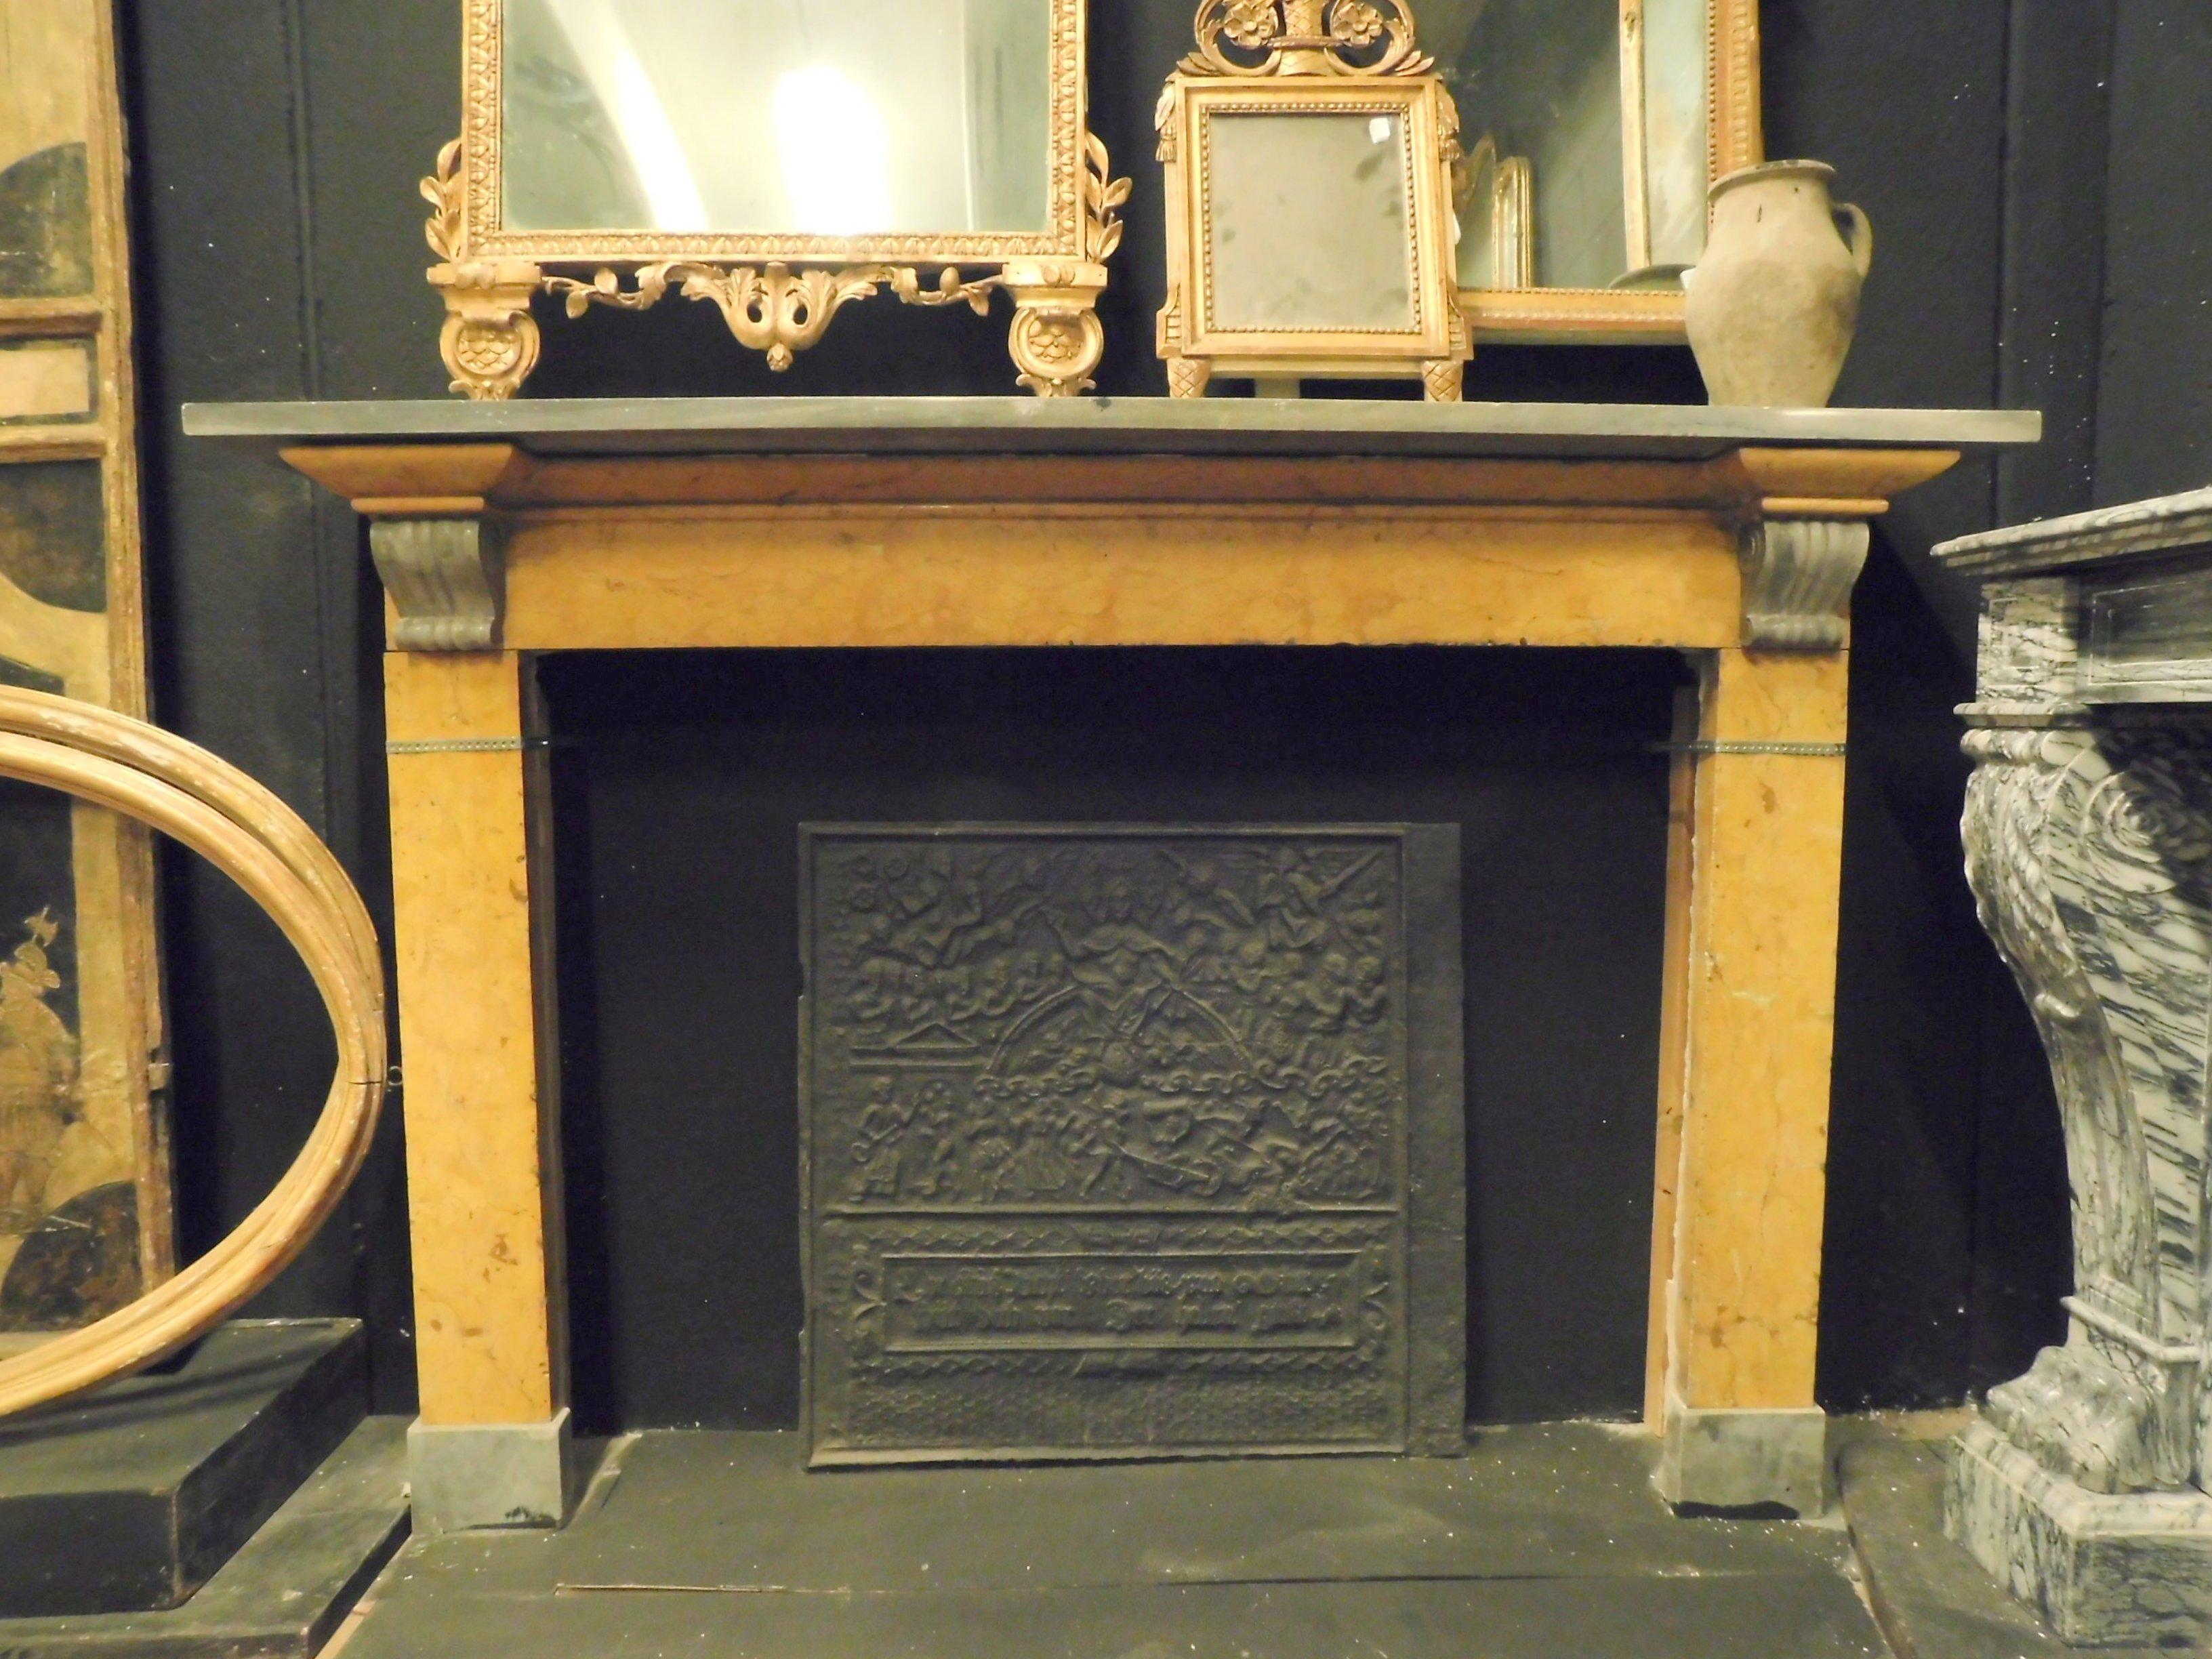 Antique fireplace mantel (fireplace) in different marble, yellow and dark gray colors, beautiful marble and simple fireplace, made in the late 19th century in Italy.
With shelf, suitable for all heat angles, the simple lines make it elegant and